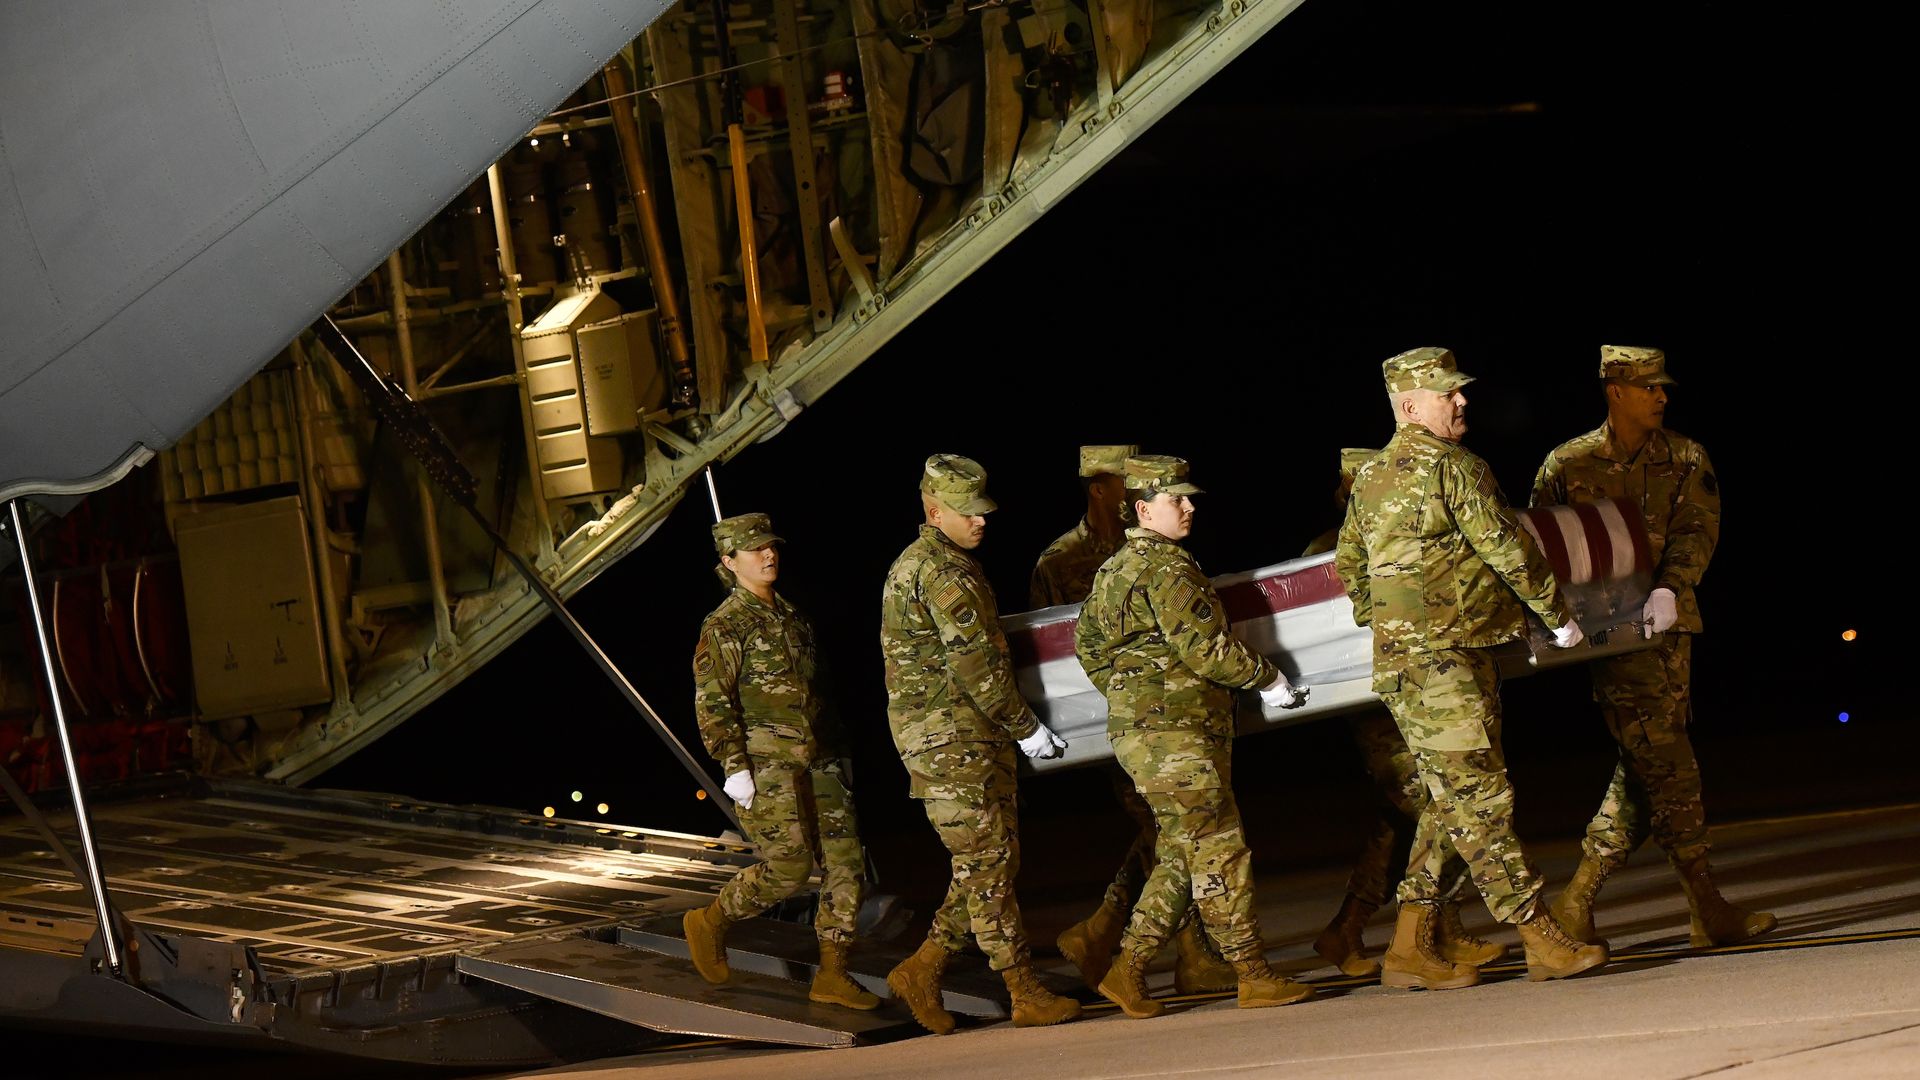  Military personnel carry a transfer case for a service member who died in the shooting.